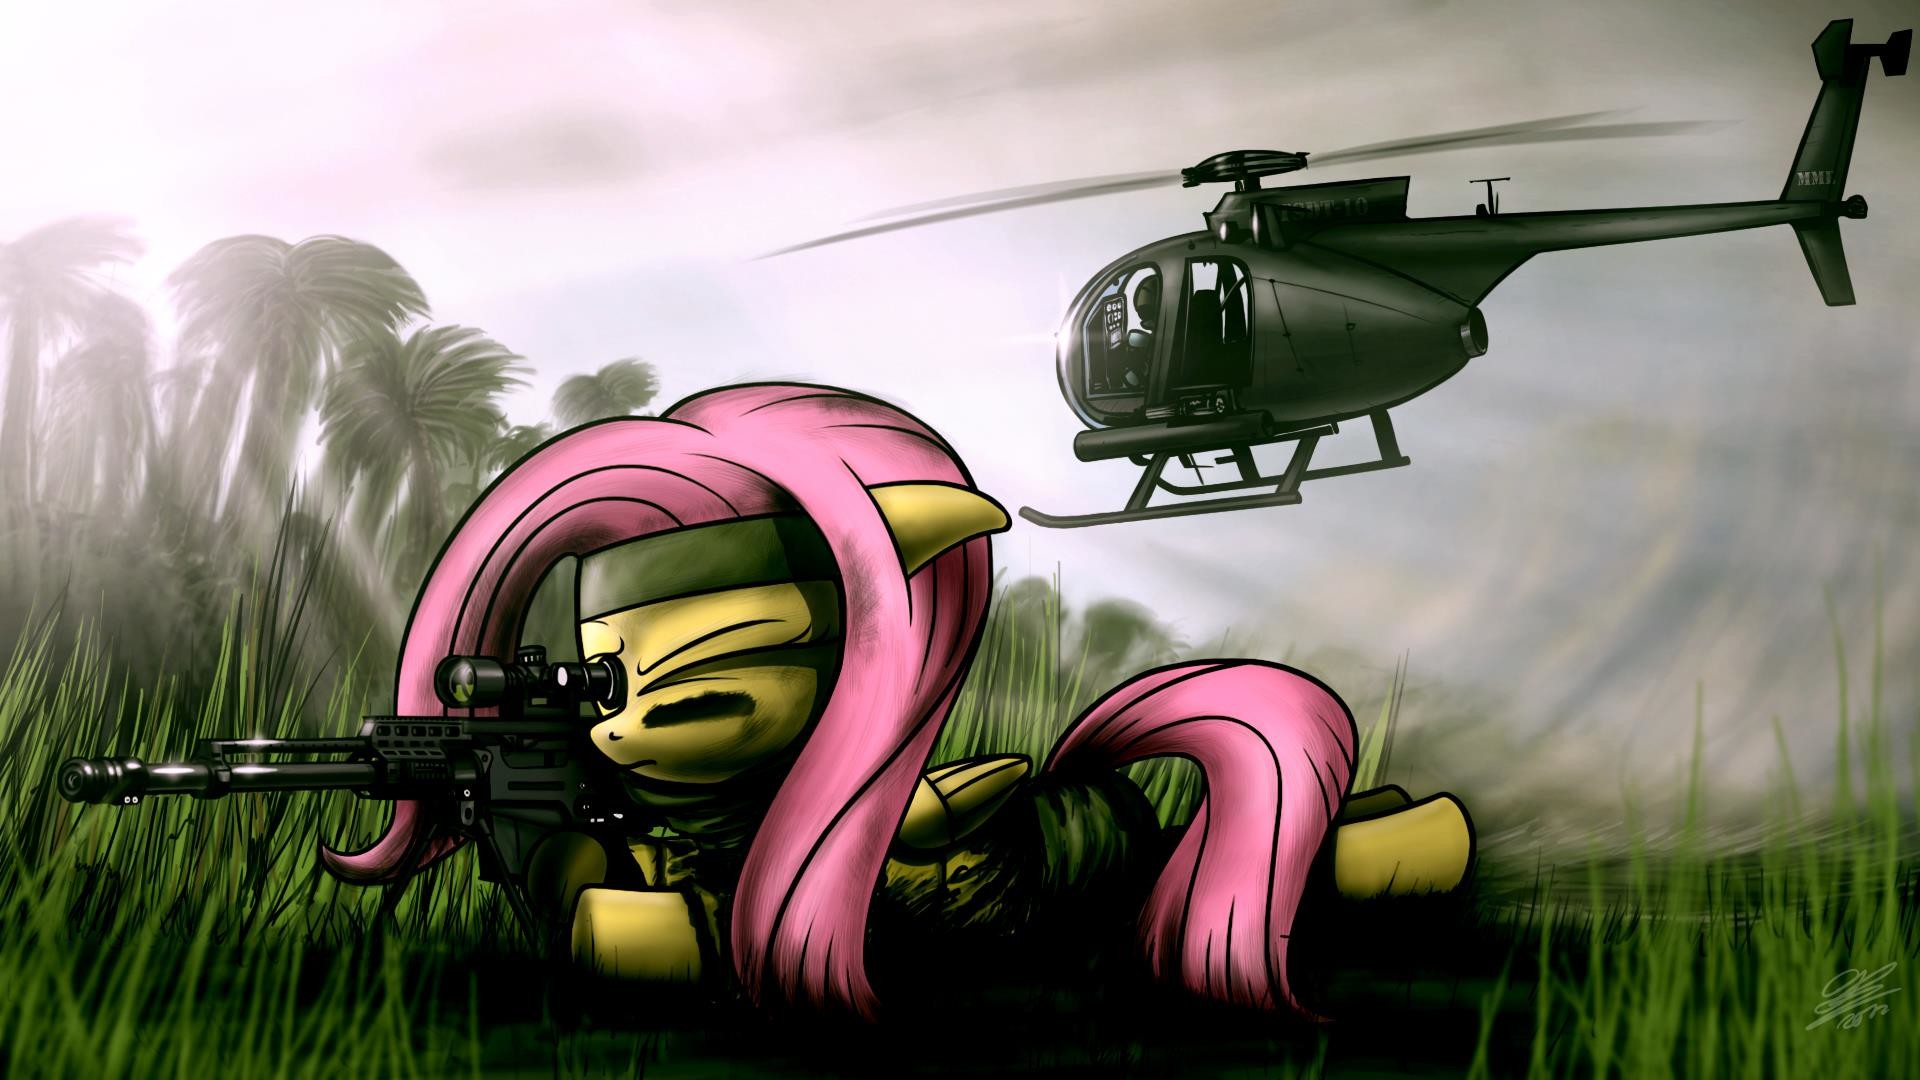 Helicopter My Little Pony Wallpapers